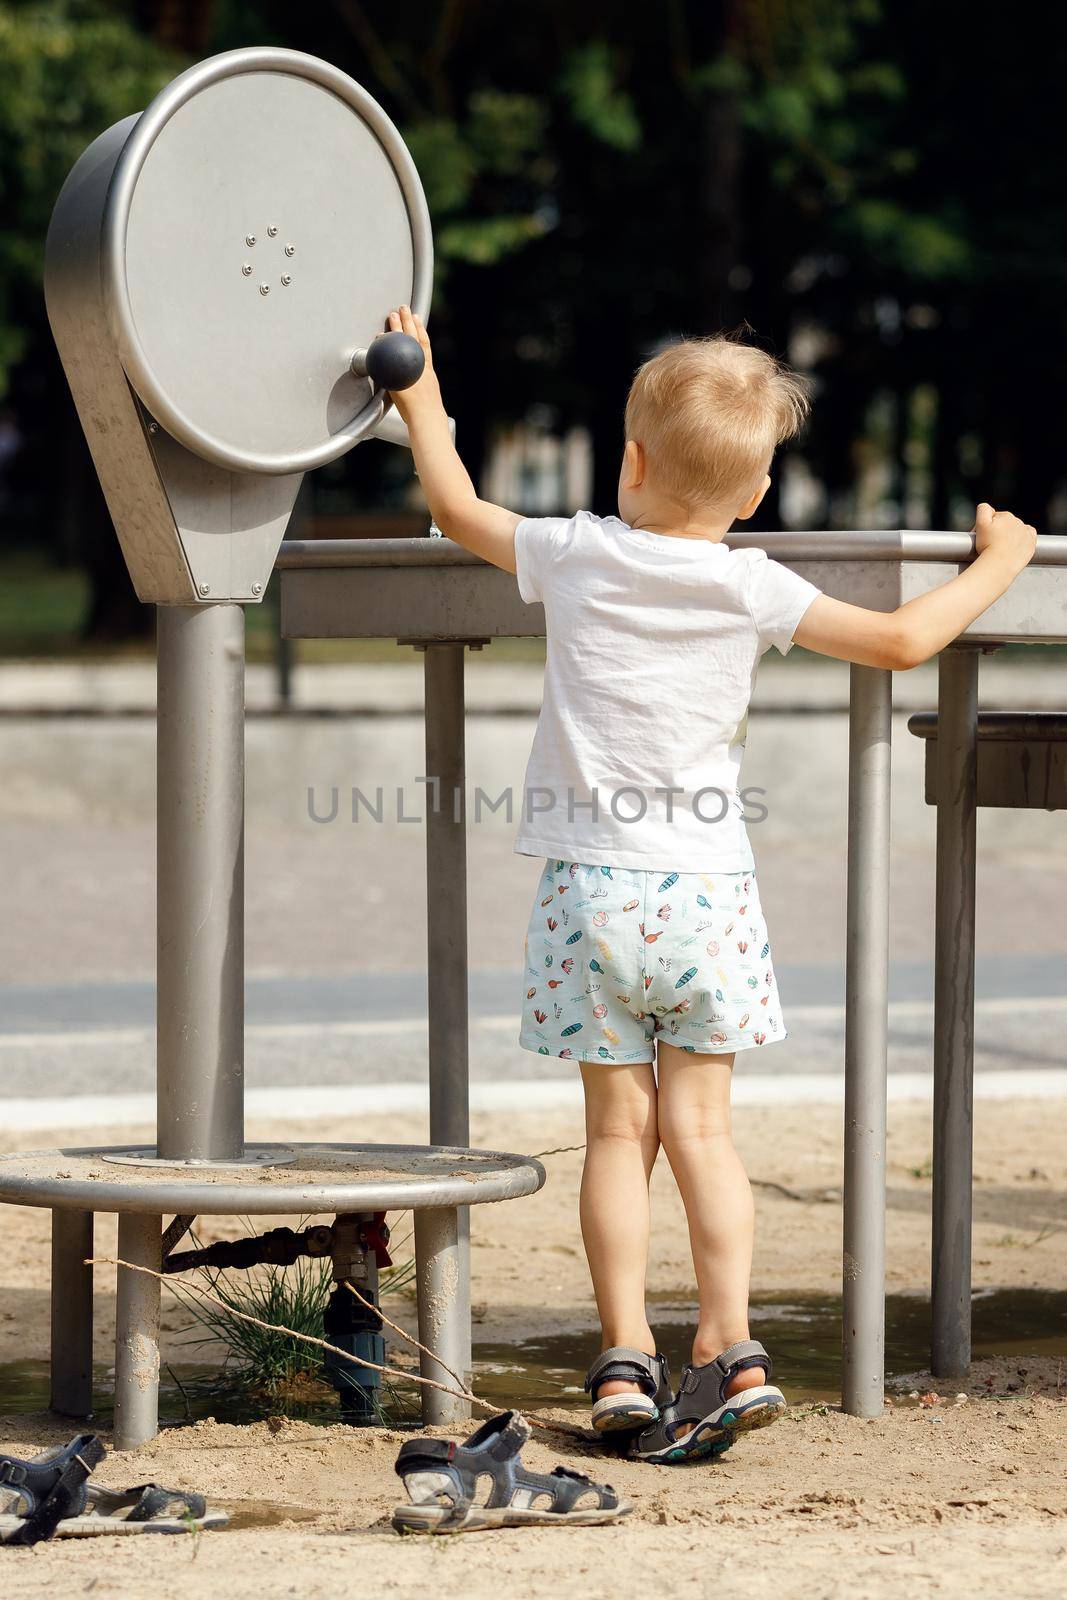 Barefoot little boy wearing shorts and t-shirt playing with water pump faucet in public park.